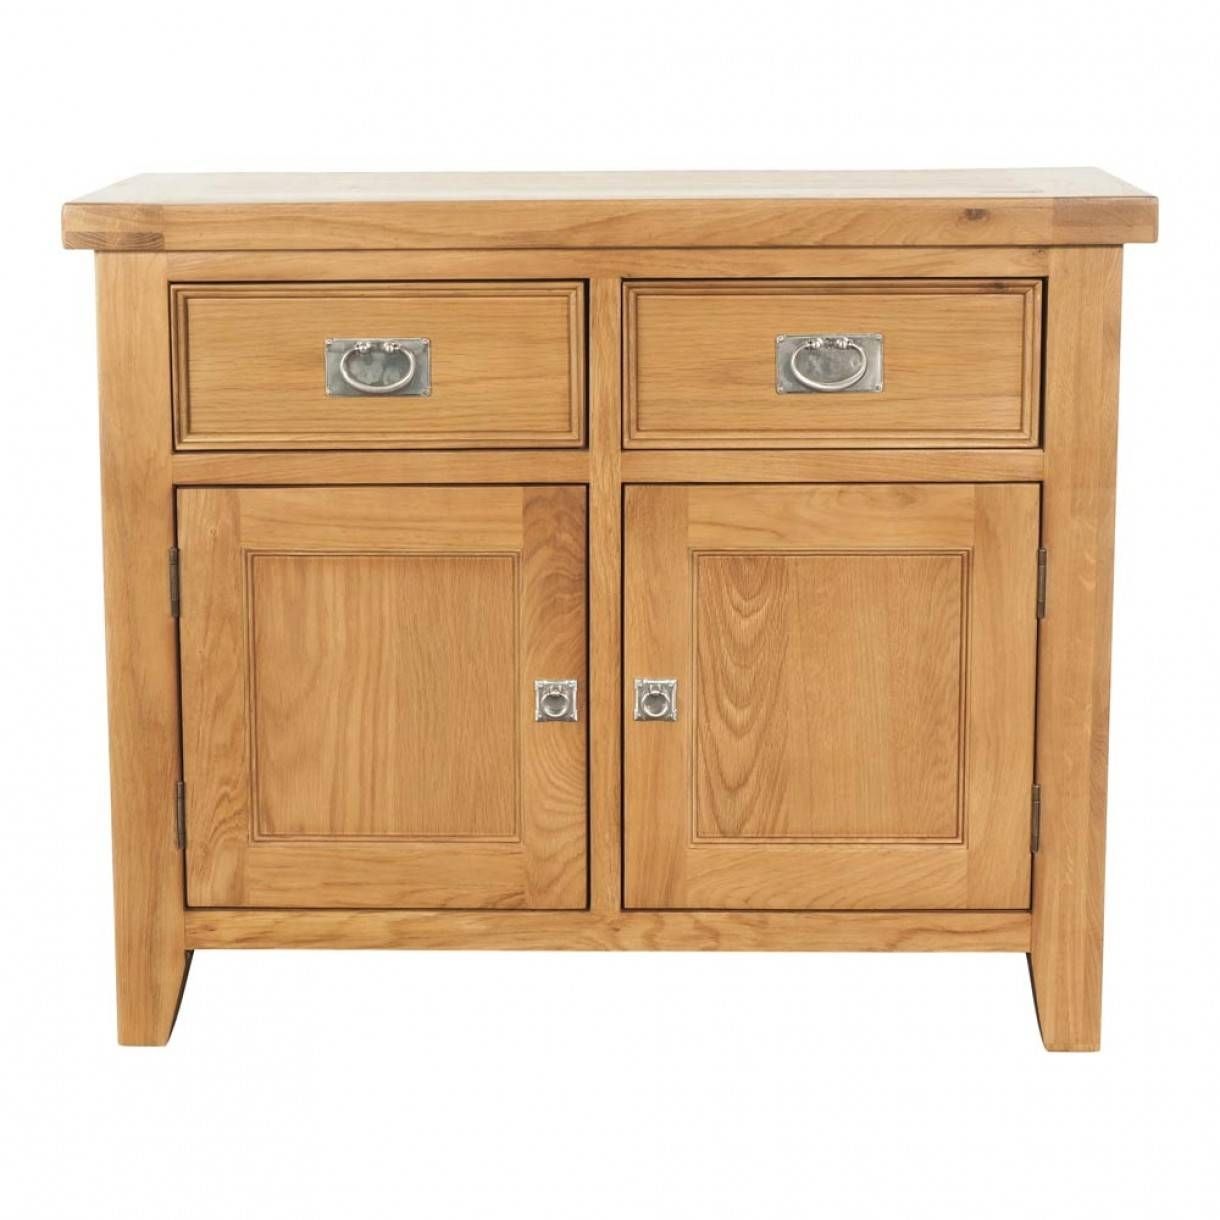 Buy Buffets And Sideboards Online | Dining | Early Settler Furniture Inside Recent Wooden Sideboards For Sale (View 15 of 15)